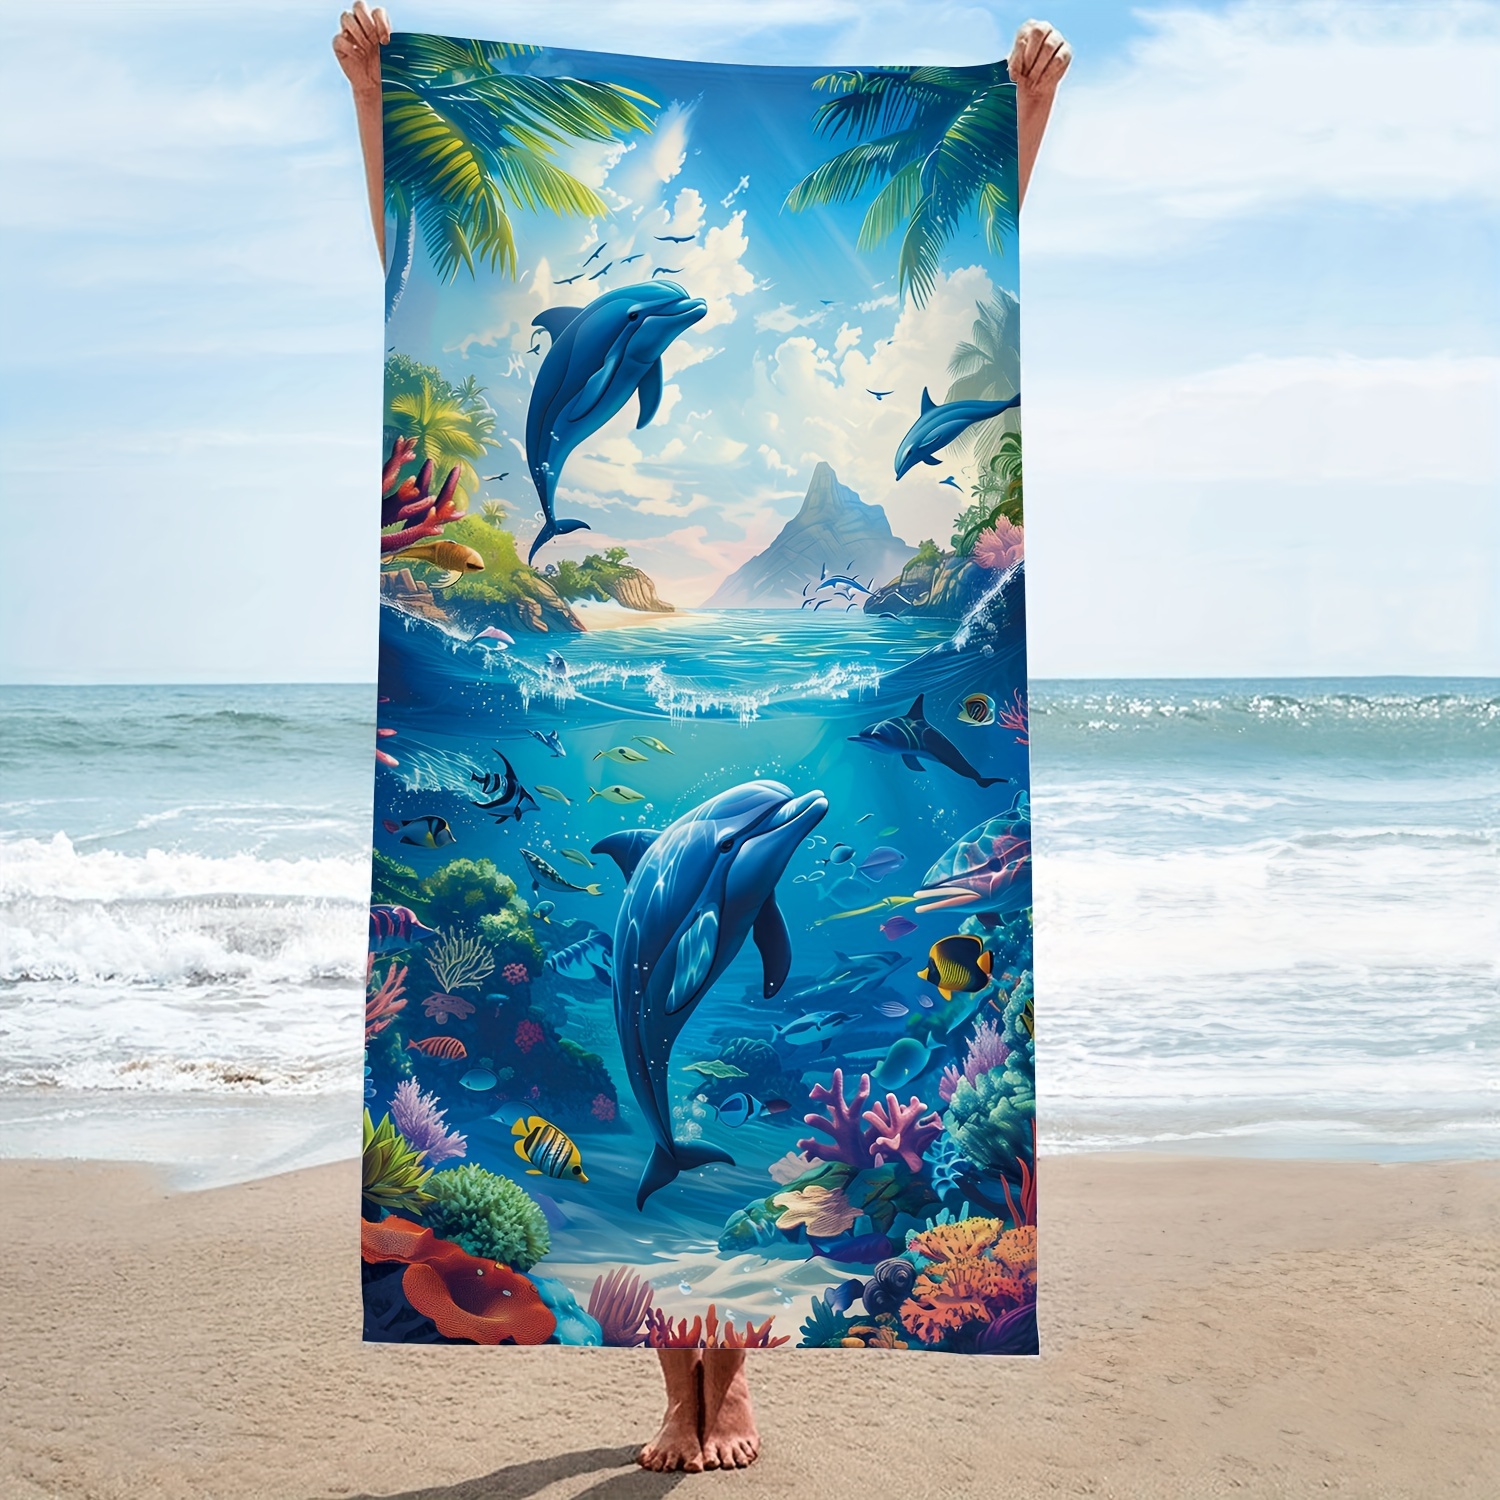 

1pc Ocean Dolphin Microfiber Oversized Beach Towel, Durable Quick Drying Sunscreen Washable Bath Towel, Summer Beach Camping Swimming Pool Travel Essentials